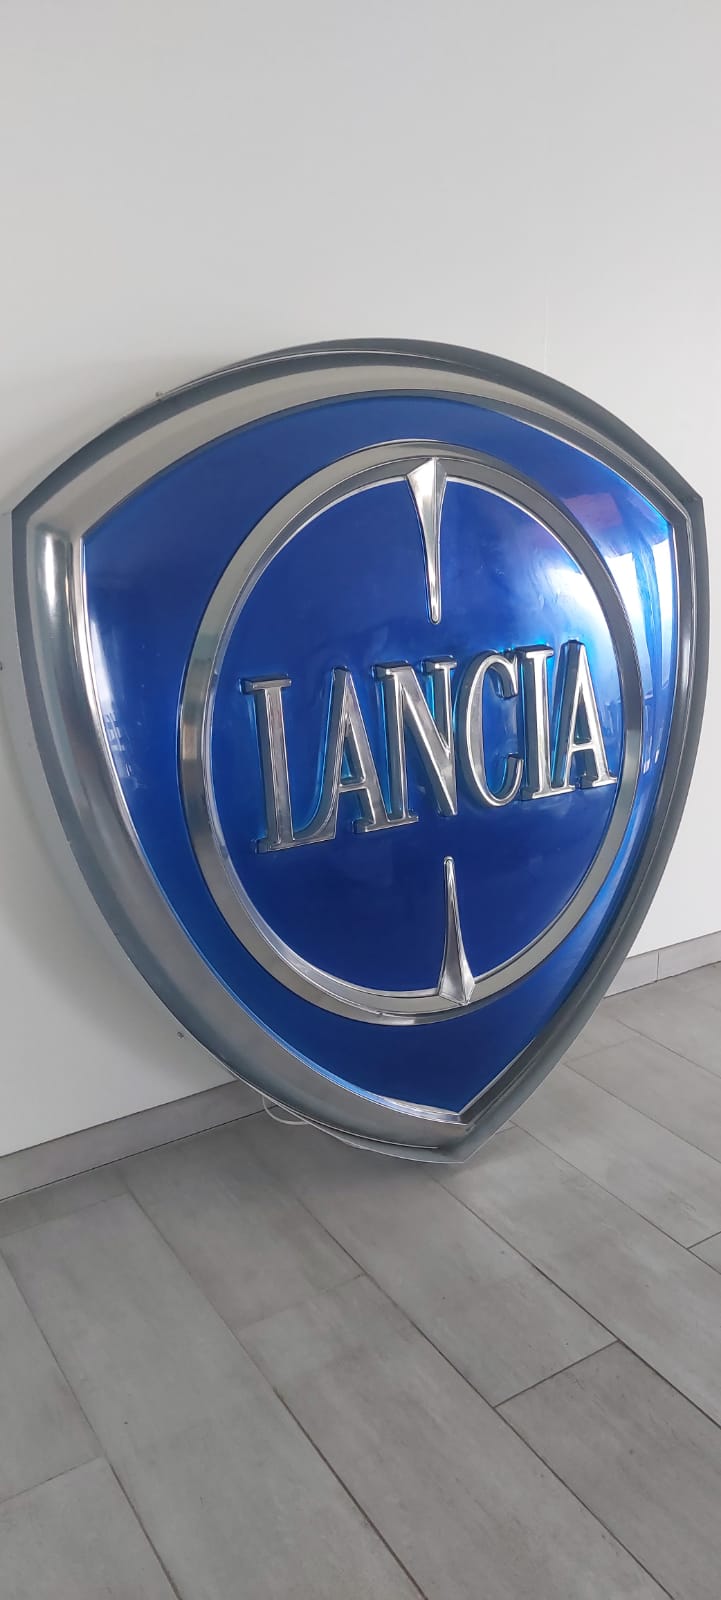 1990s Lancia official dealer very large illuminated sign